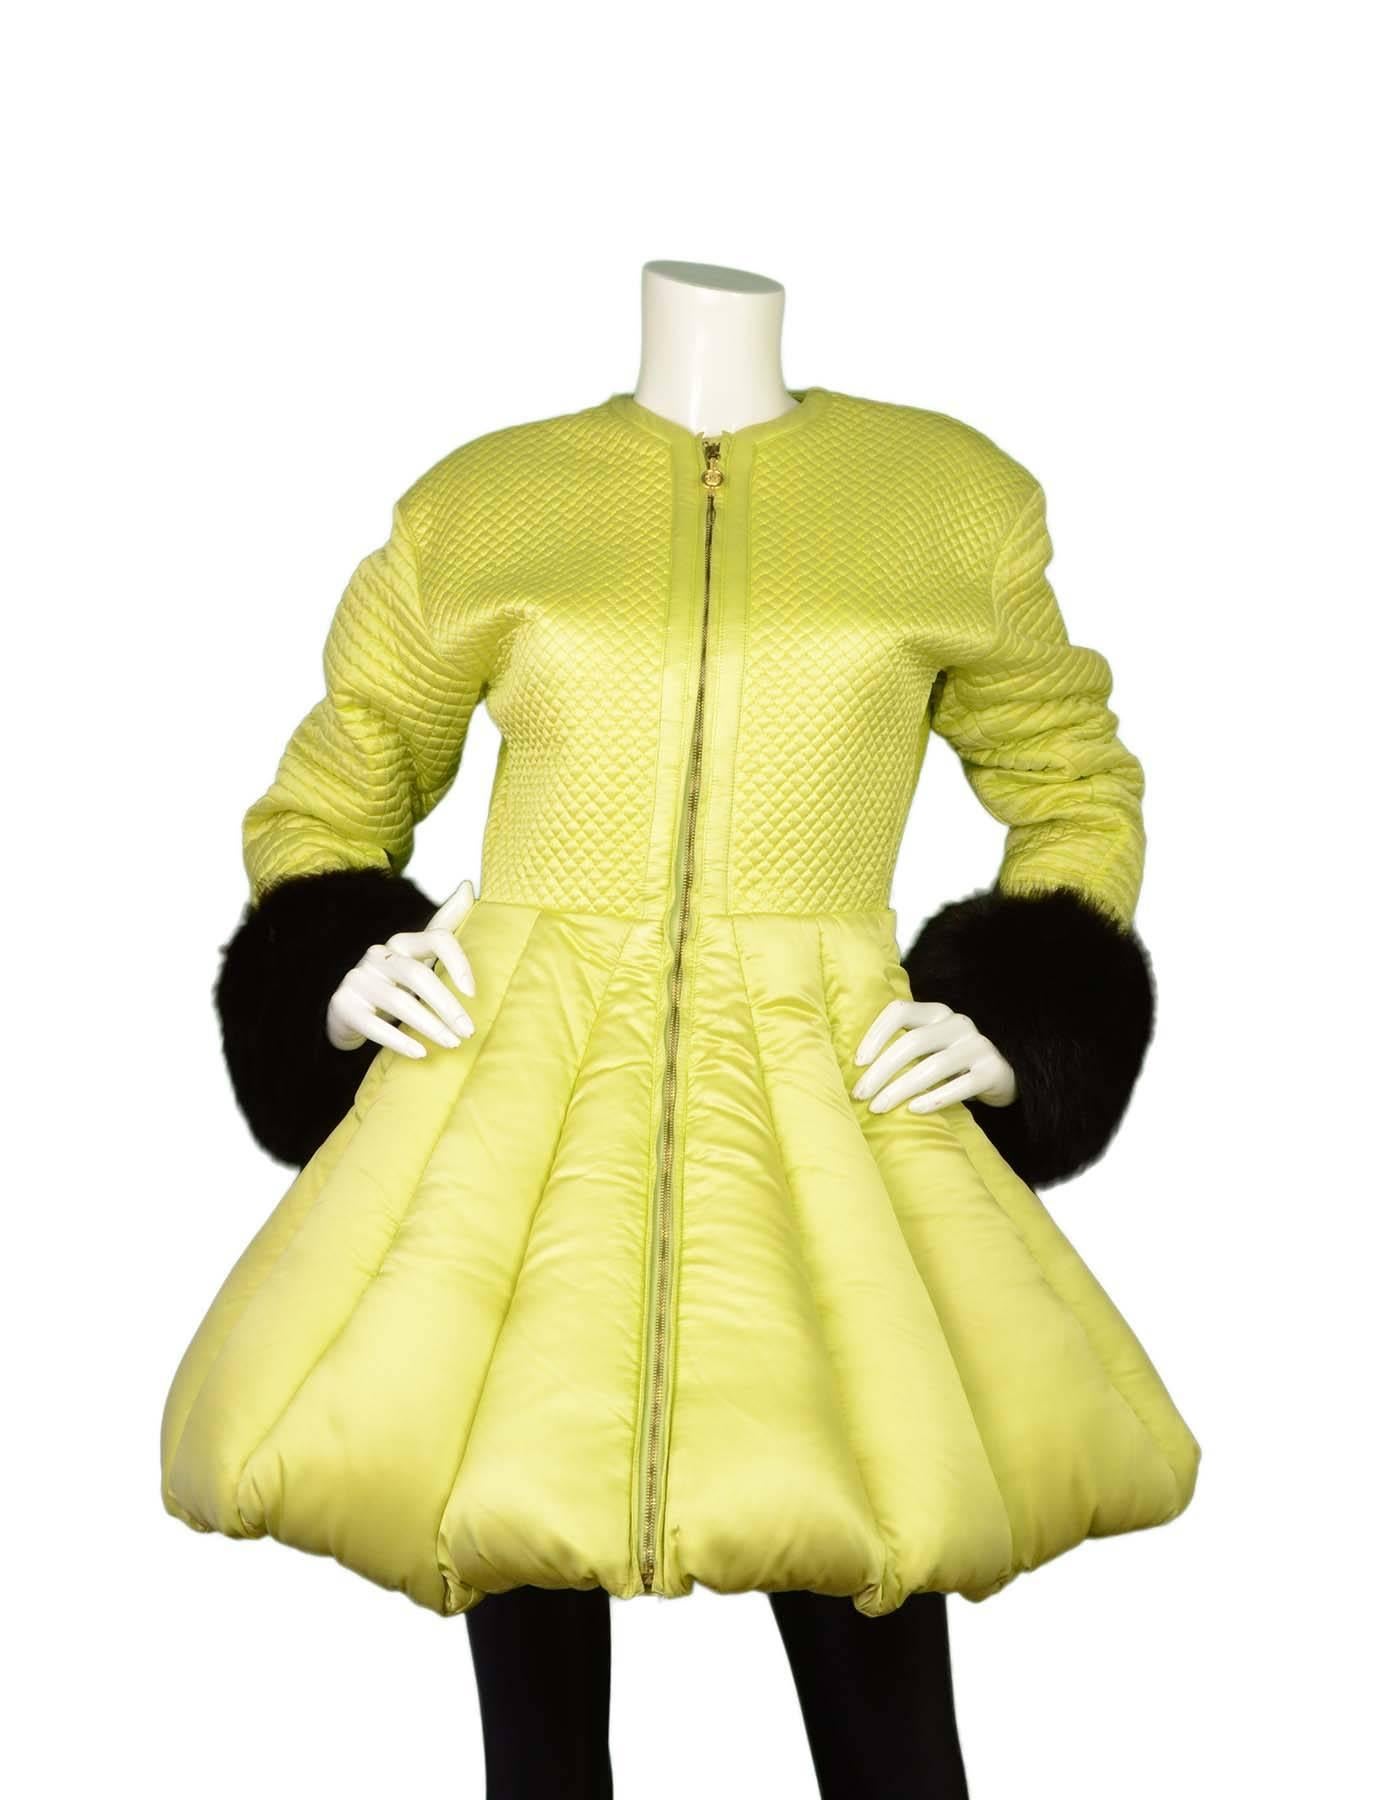 Versace Lime Green Quilted Puffer Coat 
Features brown fur cuffs

Made In: Italy
Color: Lime green and brown
Composition: 55% silk, 45% rayon
Lining: Beige quilted, 55% silk, 45% rayon
Closure/Opening: Zipper front
Exterior Pockets: